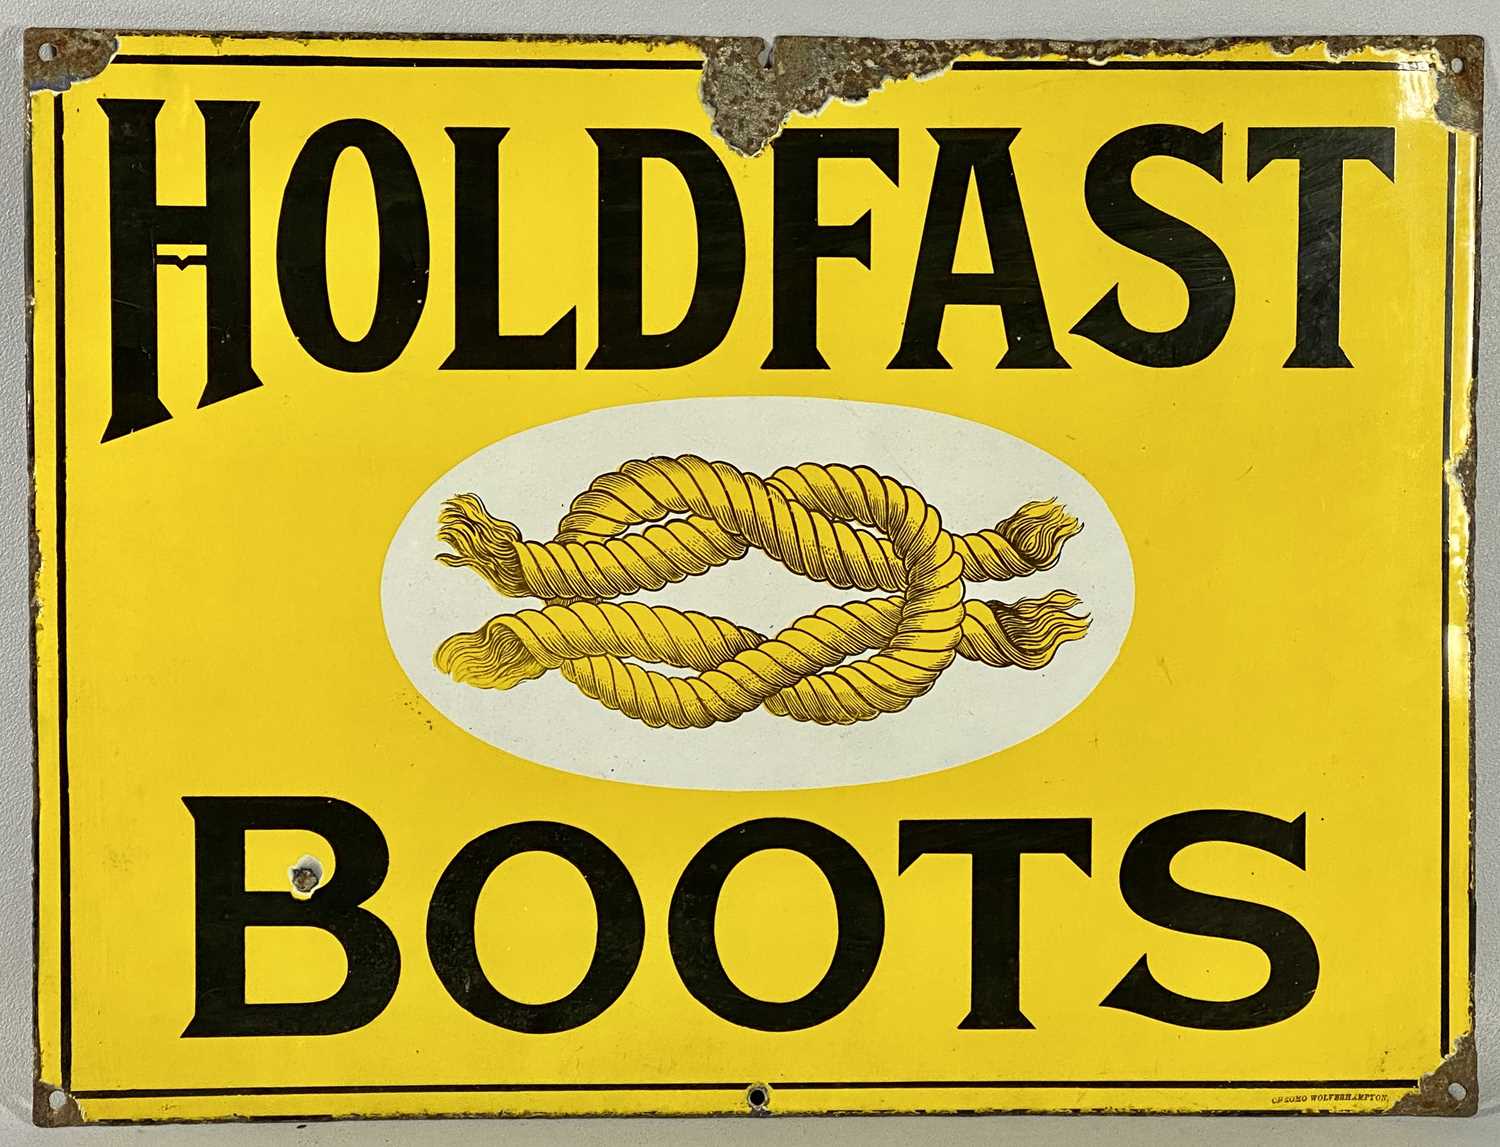 VINTAGE ENAMEL ADVERTISING SIGN FOR HOLDFAST BOOTS with black lettering and single line border,